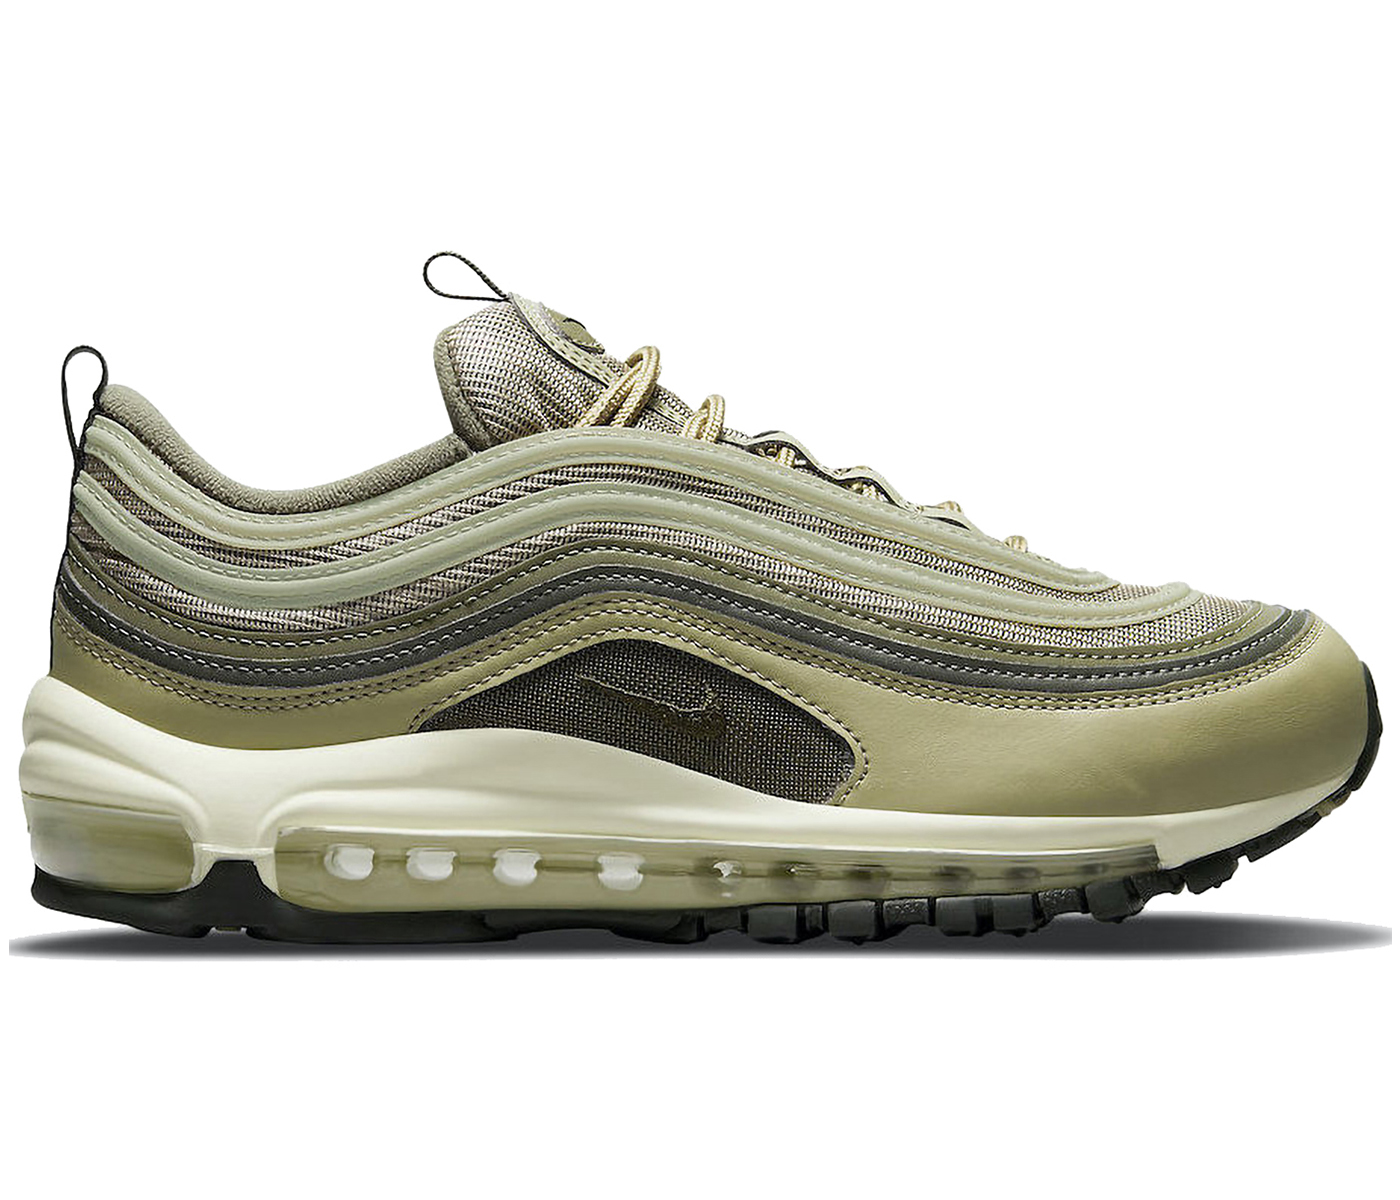 Nike Air Max 97 Neutral Olive (Women's) - DO1164-200 - US